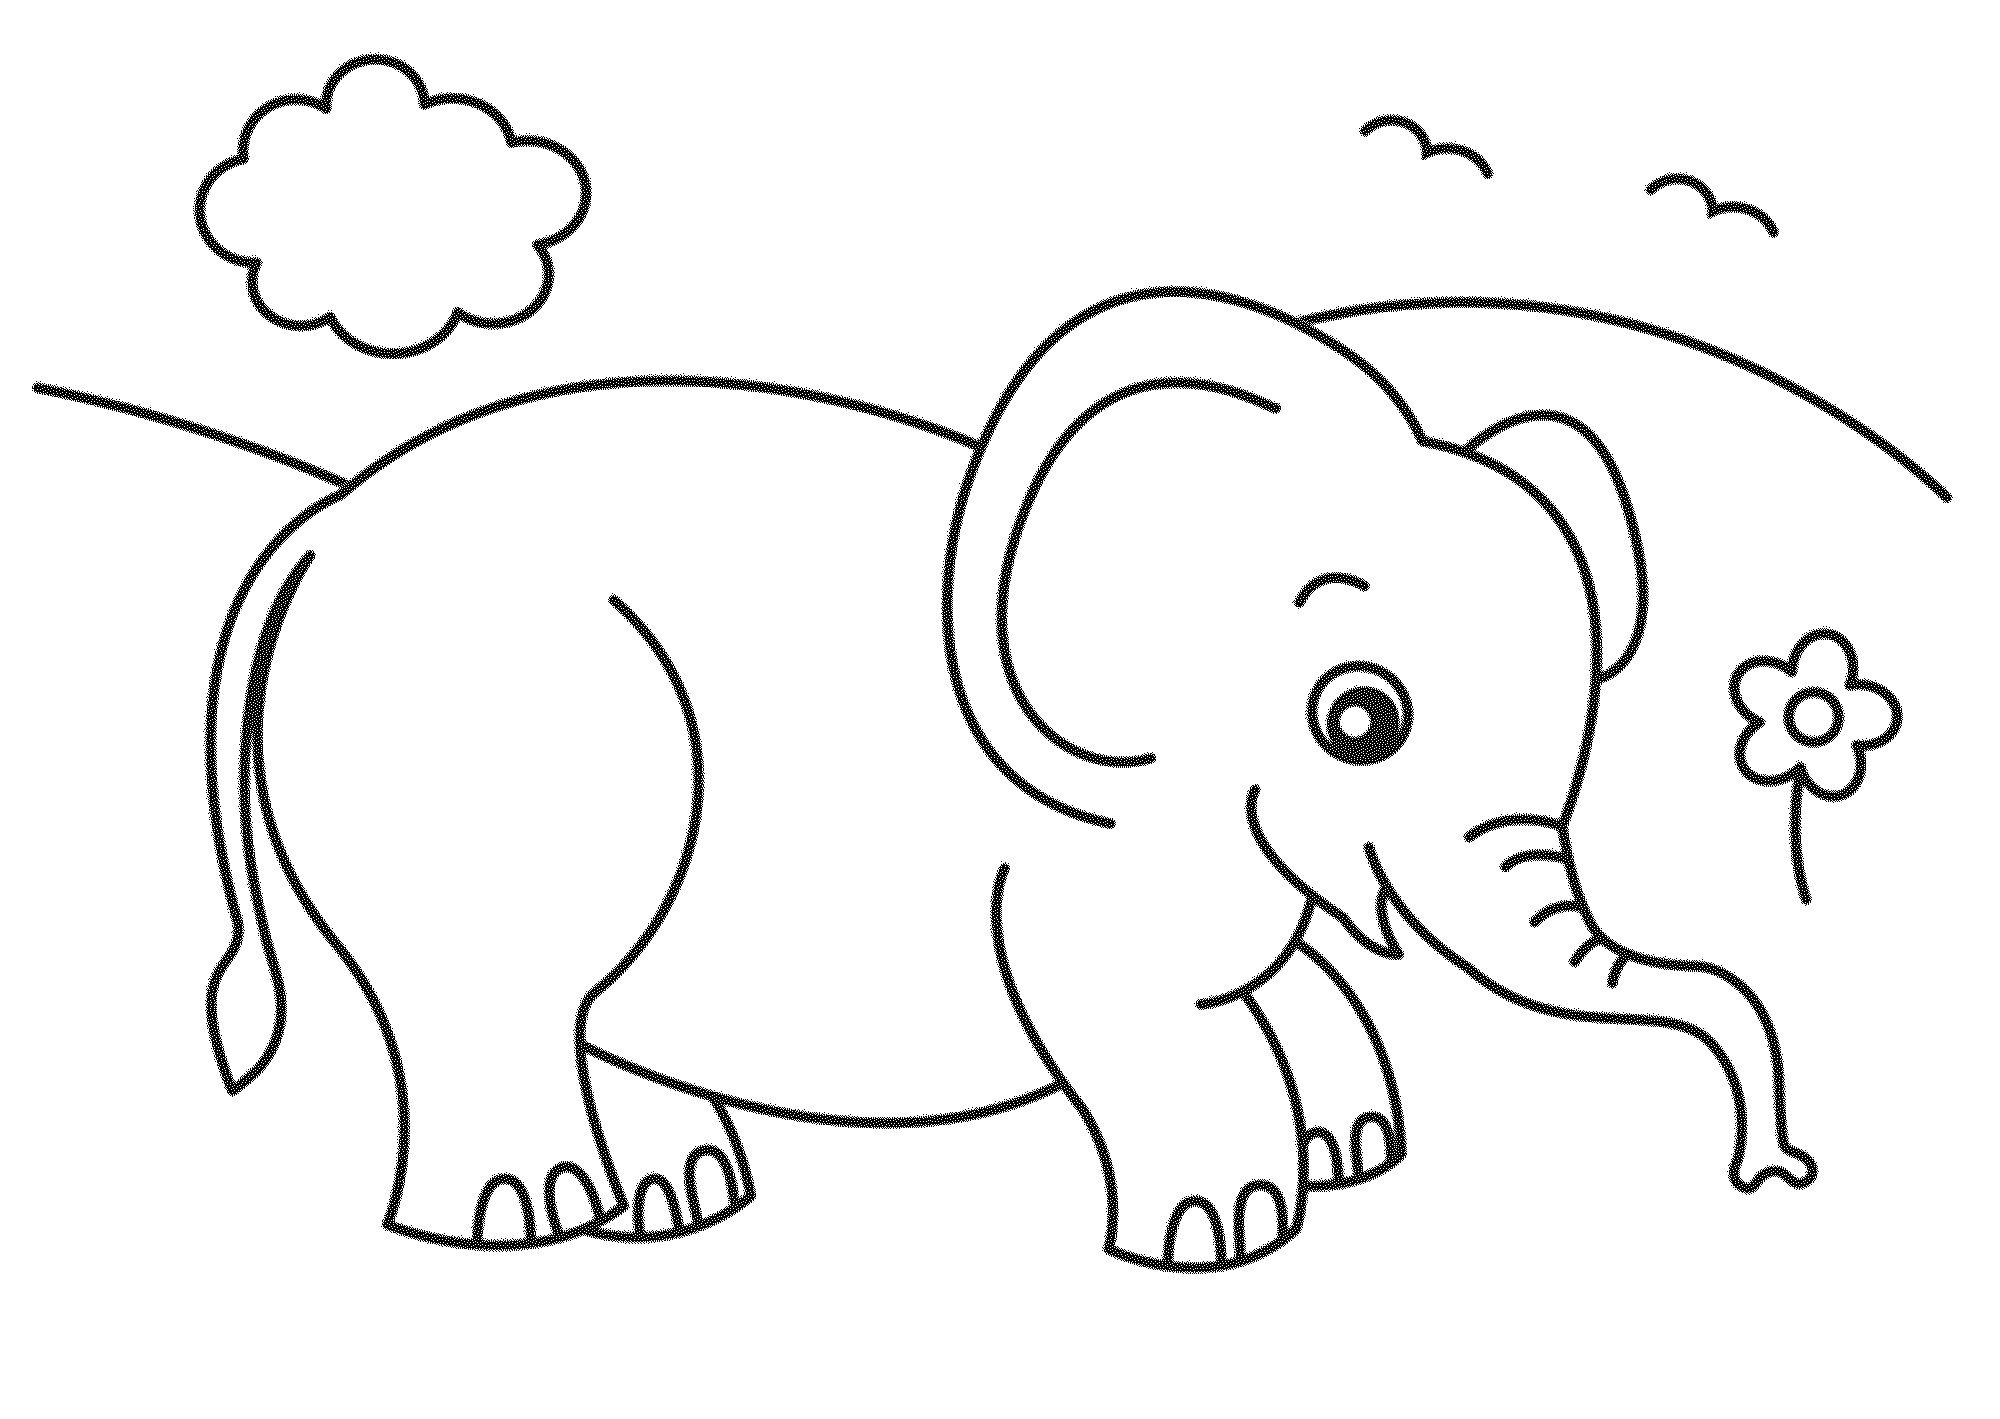 Baby Elephant Coloring Sheet
 Print & Download Teaching Kids through Elephant Coloring